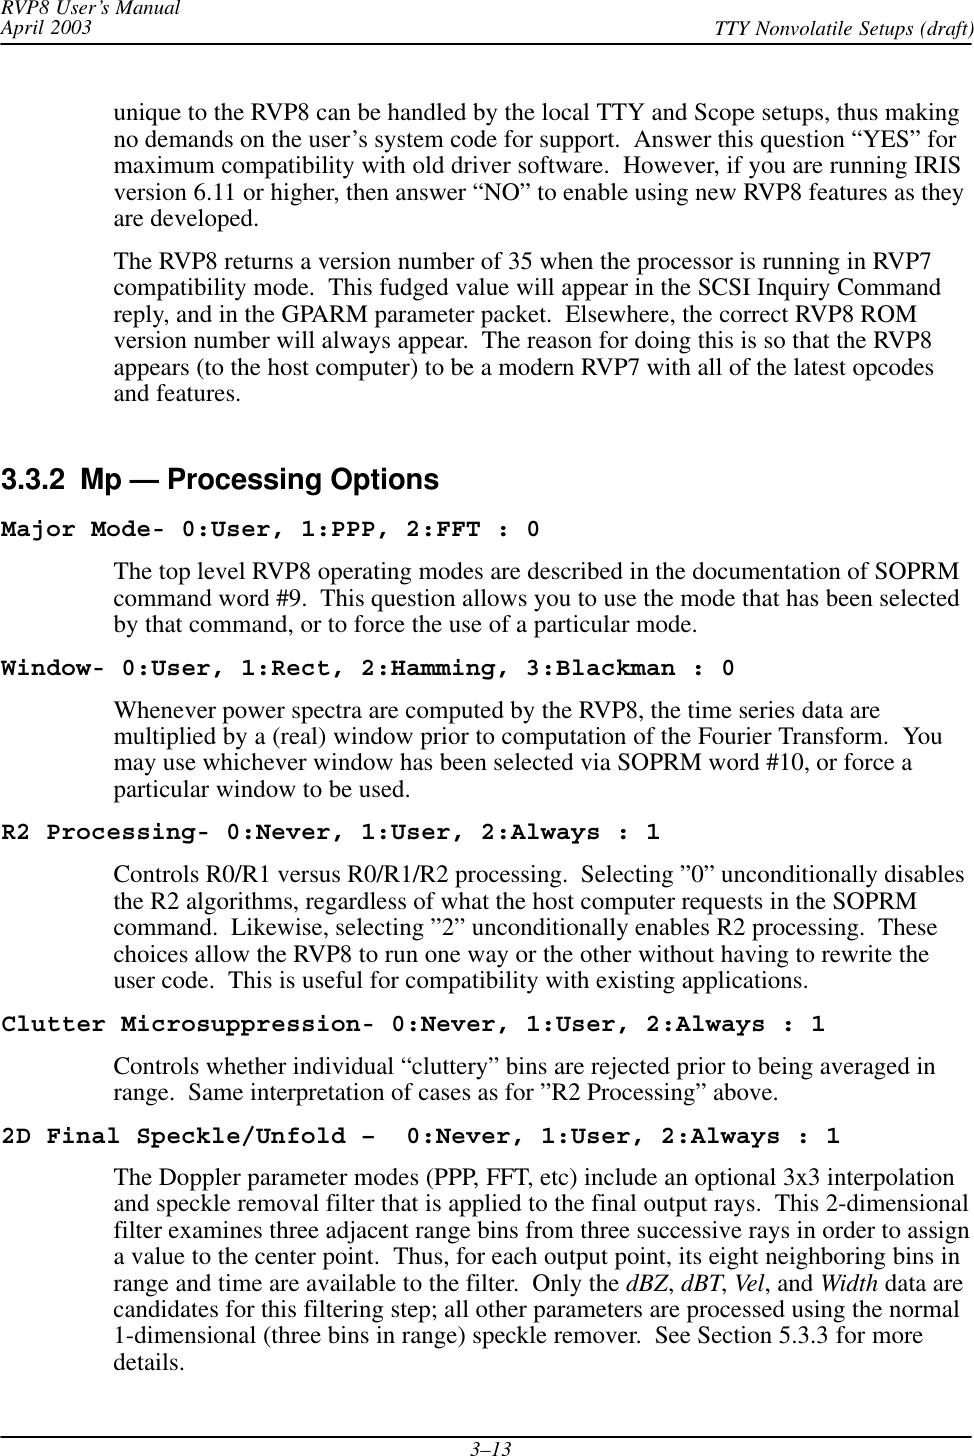 RVP8 User’s ManualApril 2003 TTY Nonvolatile Setups (draft)3–13unique to the RVP8 can be handled by the local TTY and Scope setups, thus makingno demands on the user’s system code for support.  Answer this question “YES” formaximum compatibility with old driver software.  However, if you are running IRISversion 6.11 or higher, then answer “NO” to enable using new RVP8 features as theyare developed.The RVP8 returns a version number of 35 when the processor is running in RVP7compatibility mode.  This fudged value will appear in the SCSI Inquiry Commandreply, and in the GPARM parameter packet.  Elsewhere, the correct RVP8 ROMversion number will always appear.  The reason for doing this is so that the RVP8appears (to the host computer) to be a modern RVP7 with all of the latest opcodesand features.3.3.2  Mp — Processing OptionsMajor Mode- 0:User, 1:PPP, 2:FFT : 0The top level RVP8 operating modes are described in the documentation of SOPRMcommand word #9.  This question allows you to use the mode that has been selectedby that command, or to force the use of a particular mode.Window- 0:User, 1:Rect, 2:Hamming, 3:Blackman : 0Whenever power spectra are computed by the RVP8, the time series data aremultiplied by a (real) window prior to computation of the Fourier Transform.  Youmay use whichever window has been selected via SOPRM word #10, or force aparticular window to be used.R2 Processing- 0:Never, 1:User, 2:Always : 1Controls R0/R1 versus R0/R1/R2 processing.  Selecting ”0” unconditionally disablesthe R2 algorithms, regardless of what the host computer requests in the SOPRMcommand.  Likewise, selecting ”2” unconditionally enables R2 processing.  Thesechoices allow the RVP8 to run one way or the other without having to rewrite theuser code.  This is useful for compatibility with existing applications.Clutter Microsuppression- 0:Never, 1:User, 2:Always : 1Controls whether individual “cluttery” bins are rejected prior to being averaged inrange.  Same interpretation of cases as for ”R2 Processing” above.2D Final Speckle/Unfold –  0:Never, 1:User, 2:Always : 1The Doppler parameter modes (PPP, FFT, etc) include an optional 3x3 interpolationand speckle removal filter that is applied to the final output rays.  This 2-dimensionalfilter examines three adjacent range bins from three successive rays in order to assigna value to the center point.  Thus, for each output point, its eight neighboring bins inrange and time are available to the filter.  Only the dBZ,dBT,Vel, and Width data arecandidates for this filtering step; all other parameters are processed using the normal1-dimensional (three bins in range) speckle remover.  See Section 5.3.3 for moredetails.